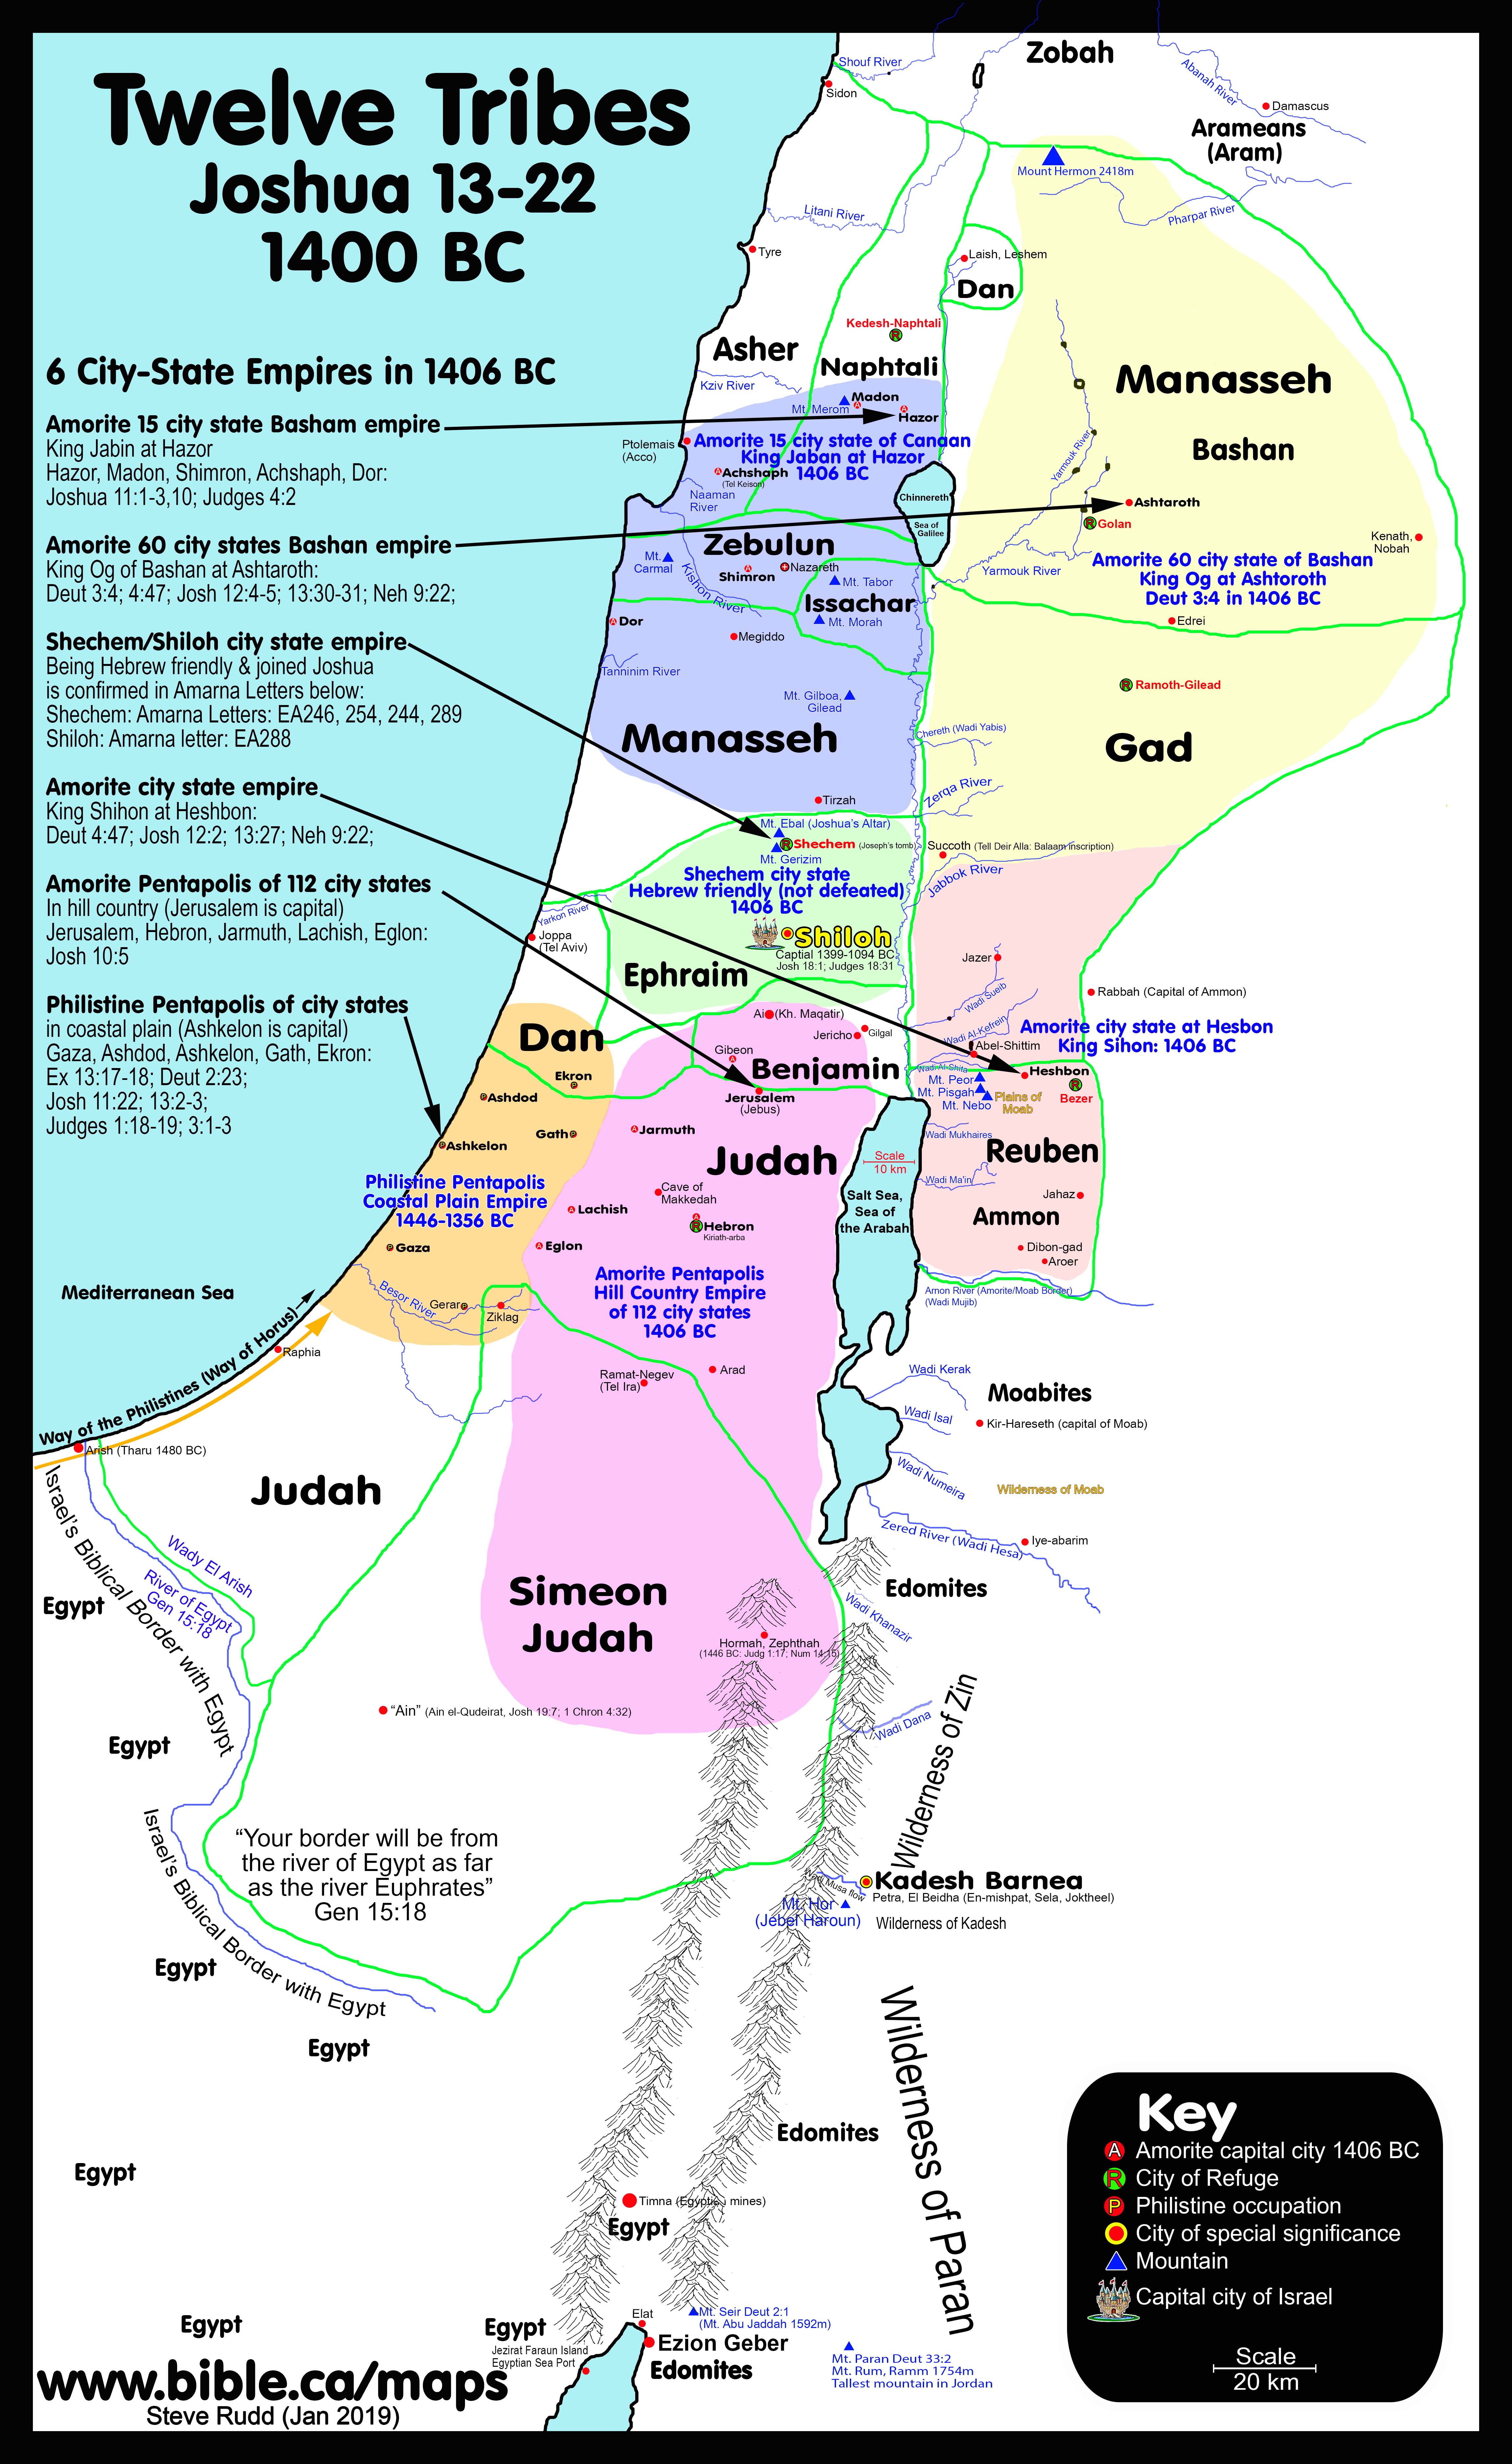 Map Of The Twelve Tribes Of Israel Joshua Divides The Land 1400 Bc